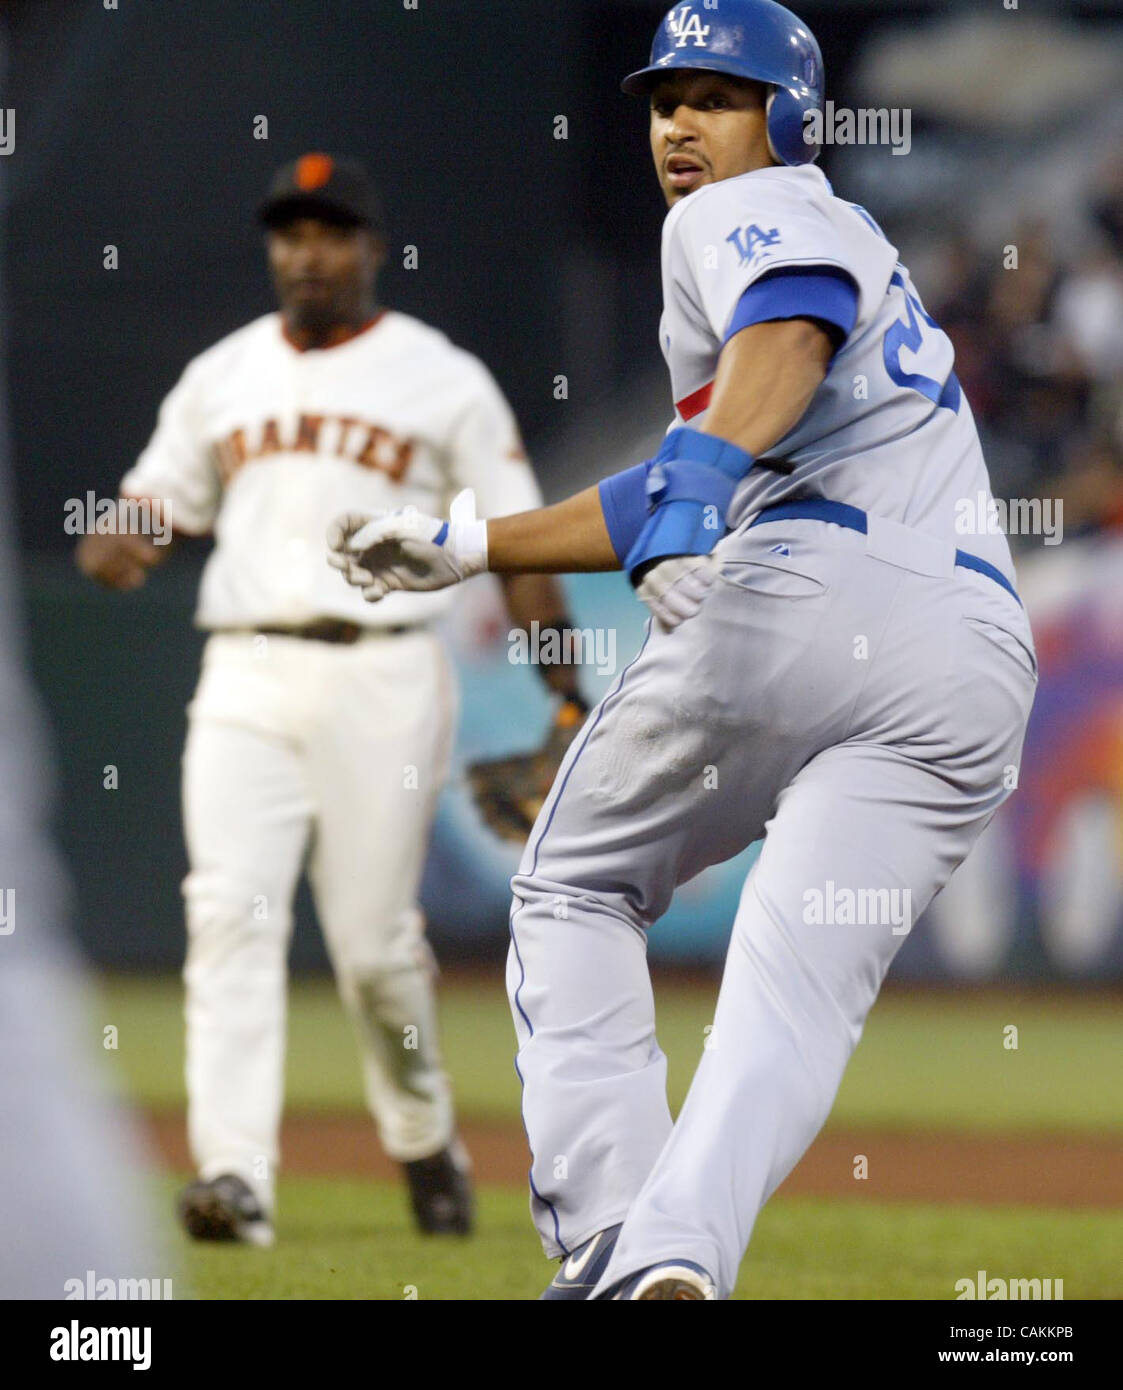 Los Angeles Dodgers Matt Kemp is rundown between first and second bases by the San Francisco Giants during the first inning at AT&T Park in San Francisco, Calif., on Friday  Sep. 7, 2007. (Ray Chavez/The Oakland Tribune) Stock Photo